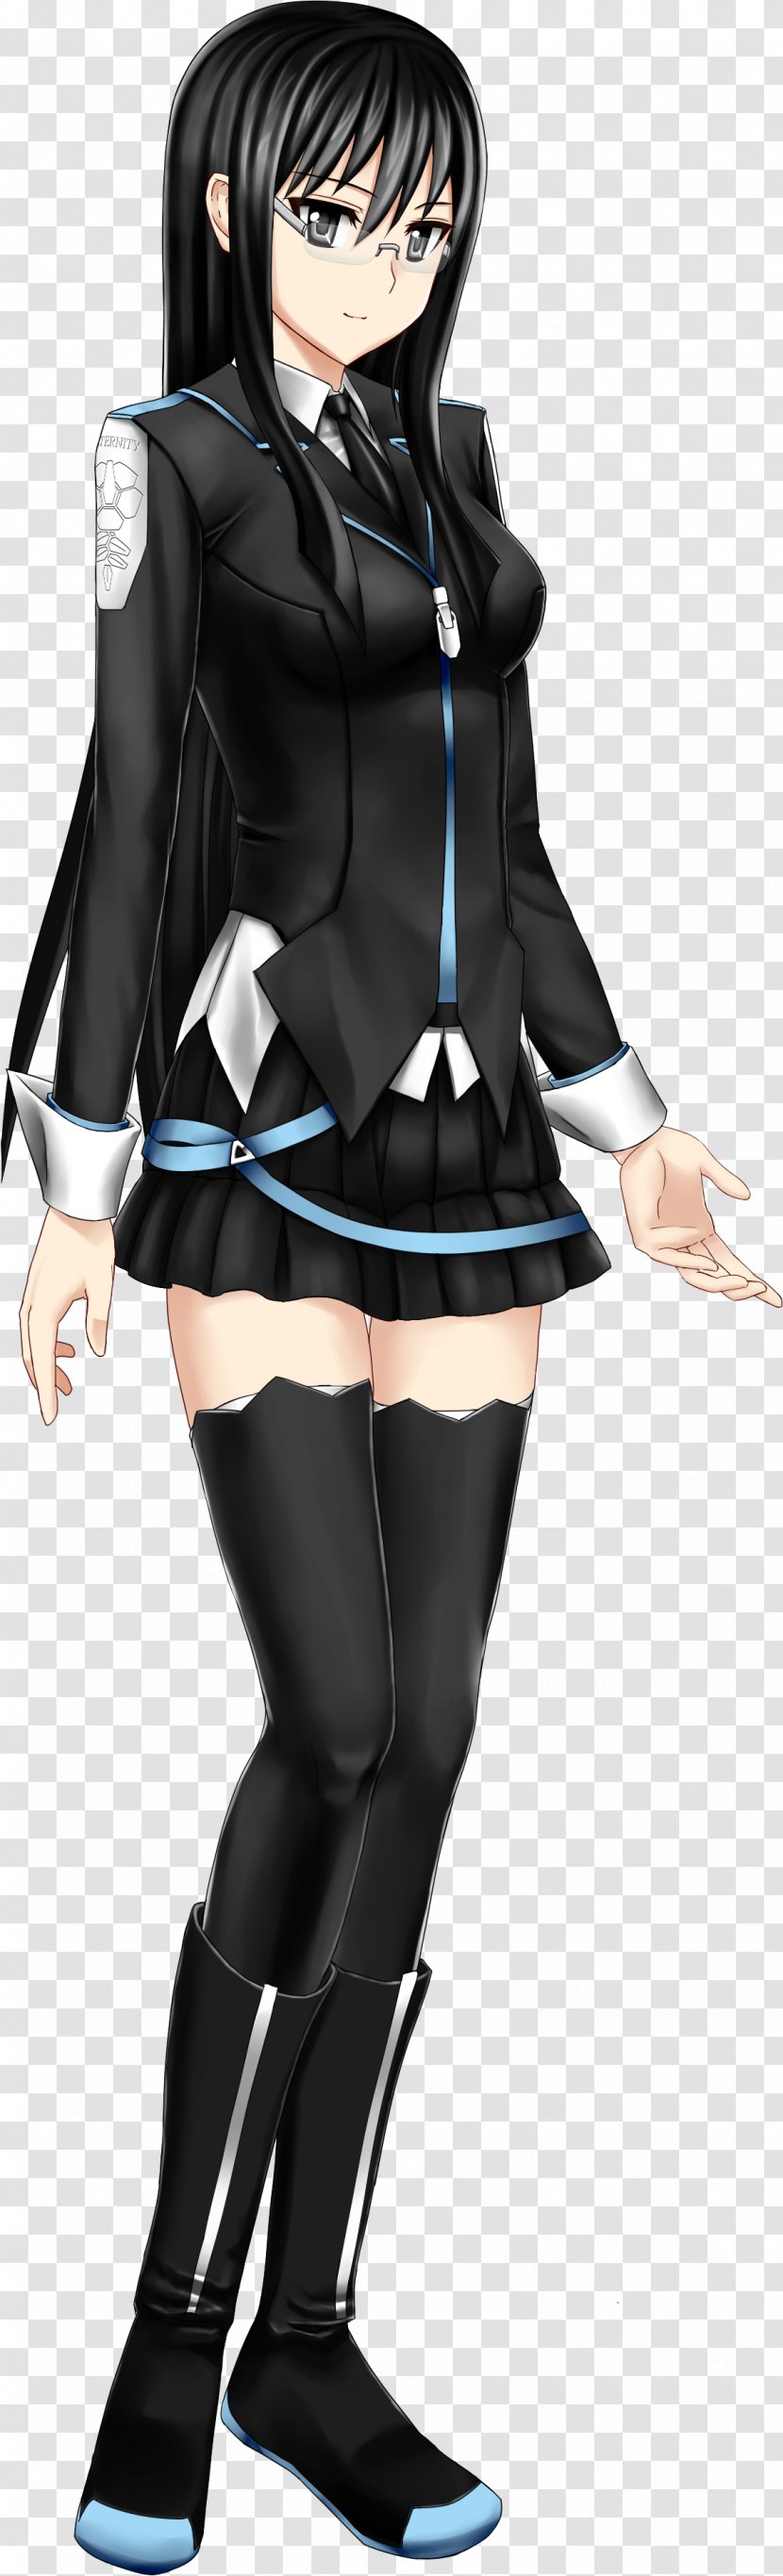 Analogue: A Hate Story Minecraft Plus Visual Novel Video Game - Watercolor - School Girls Transparent PNG